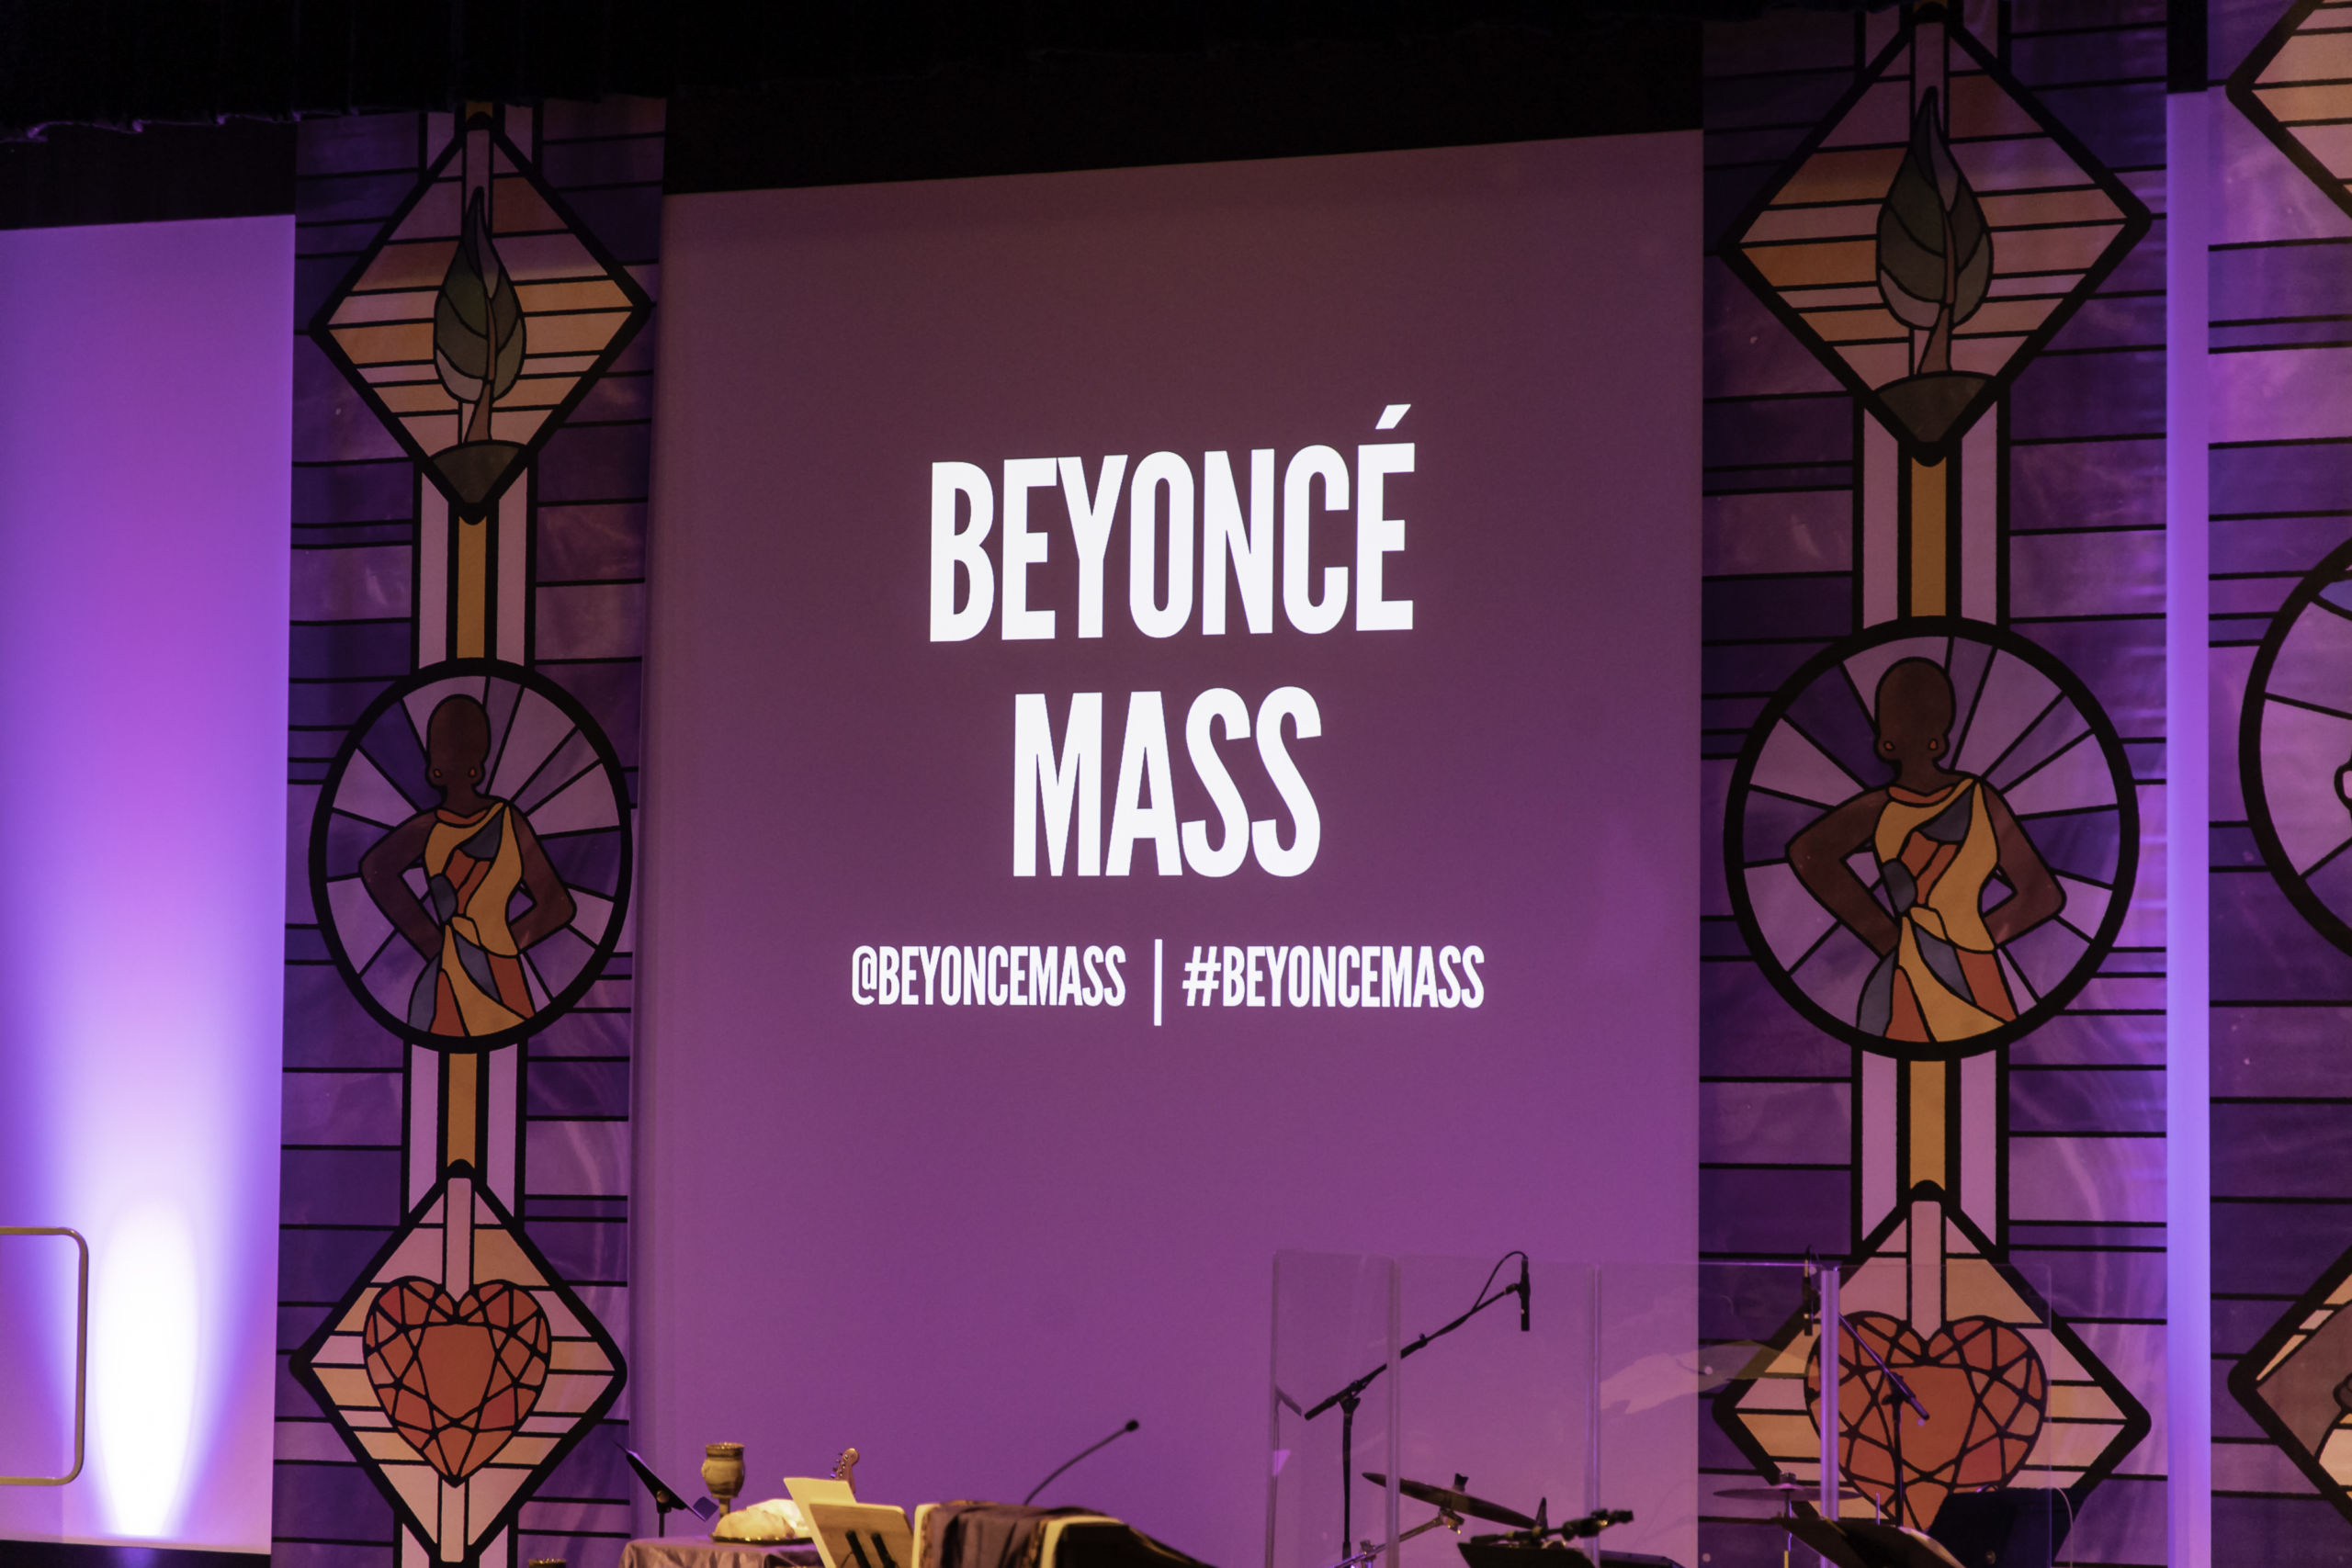 Beyonce Mass projected on church wall